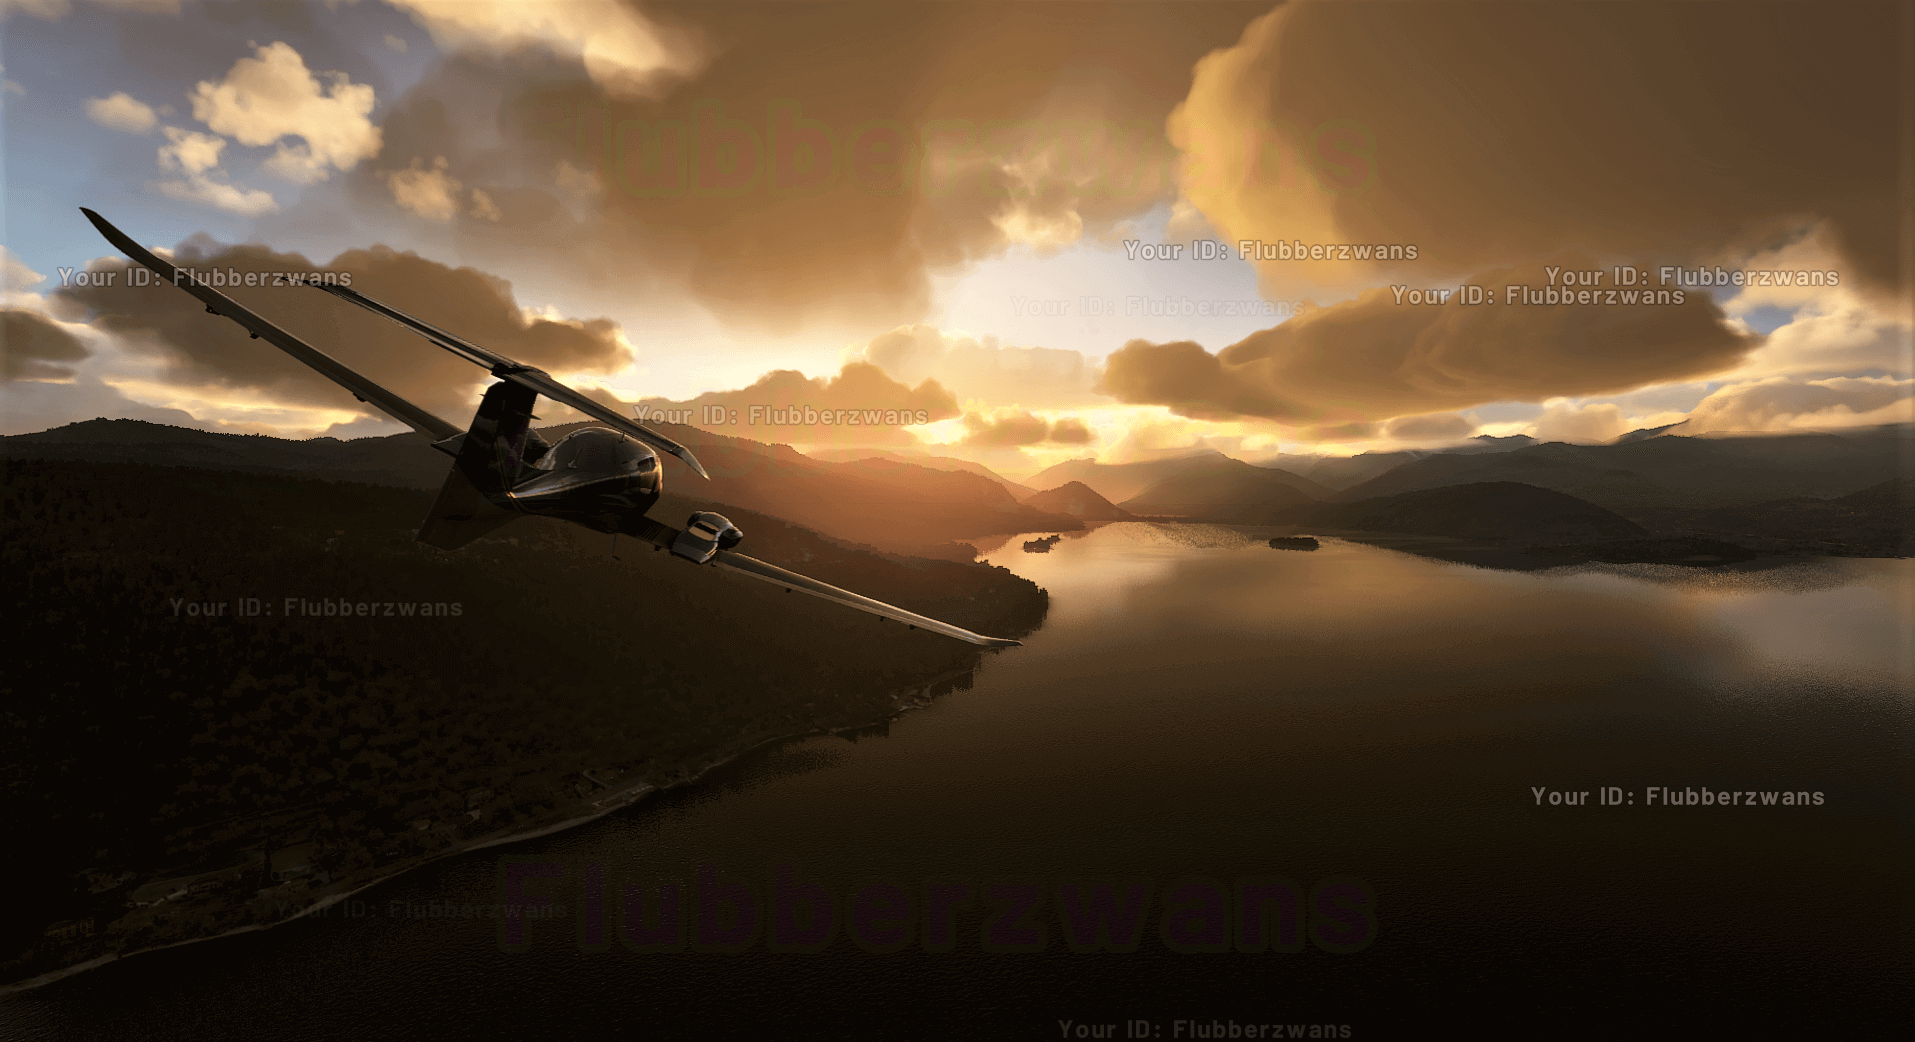 Here are the official PC system requirements for Microsoft Flight Simulator